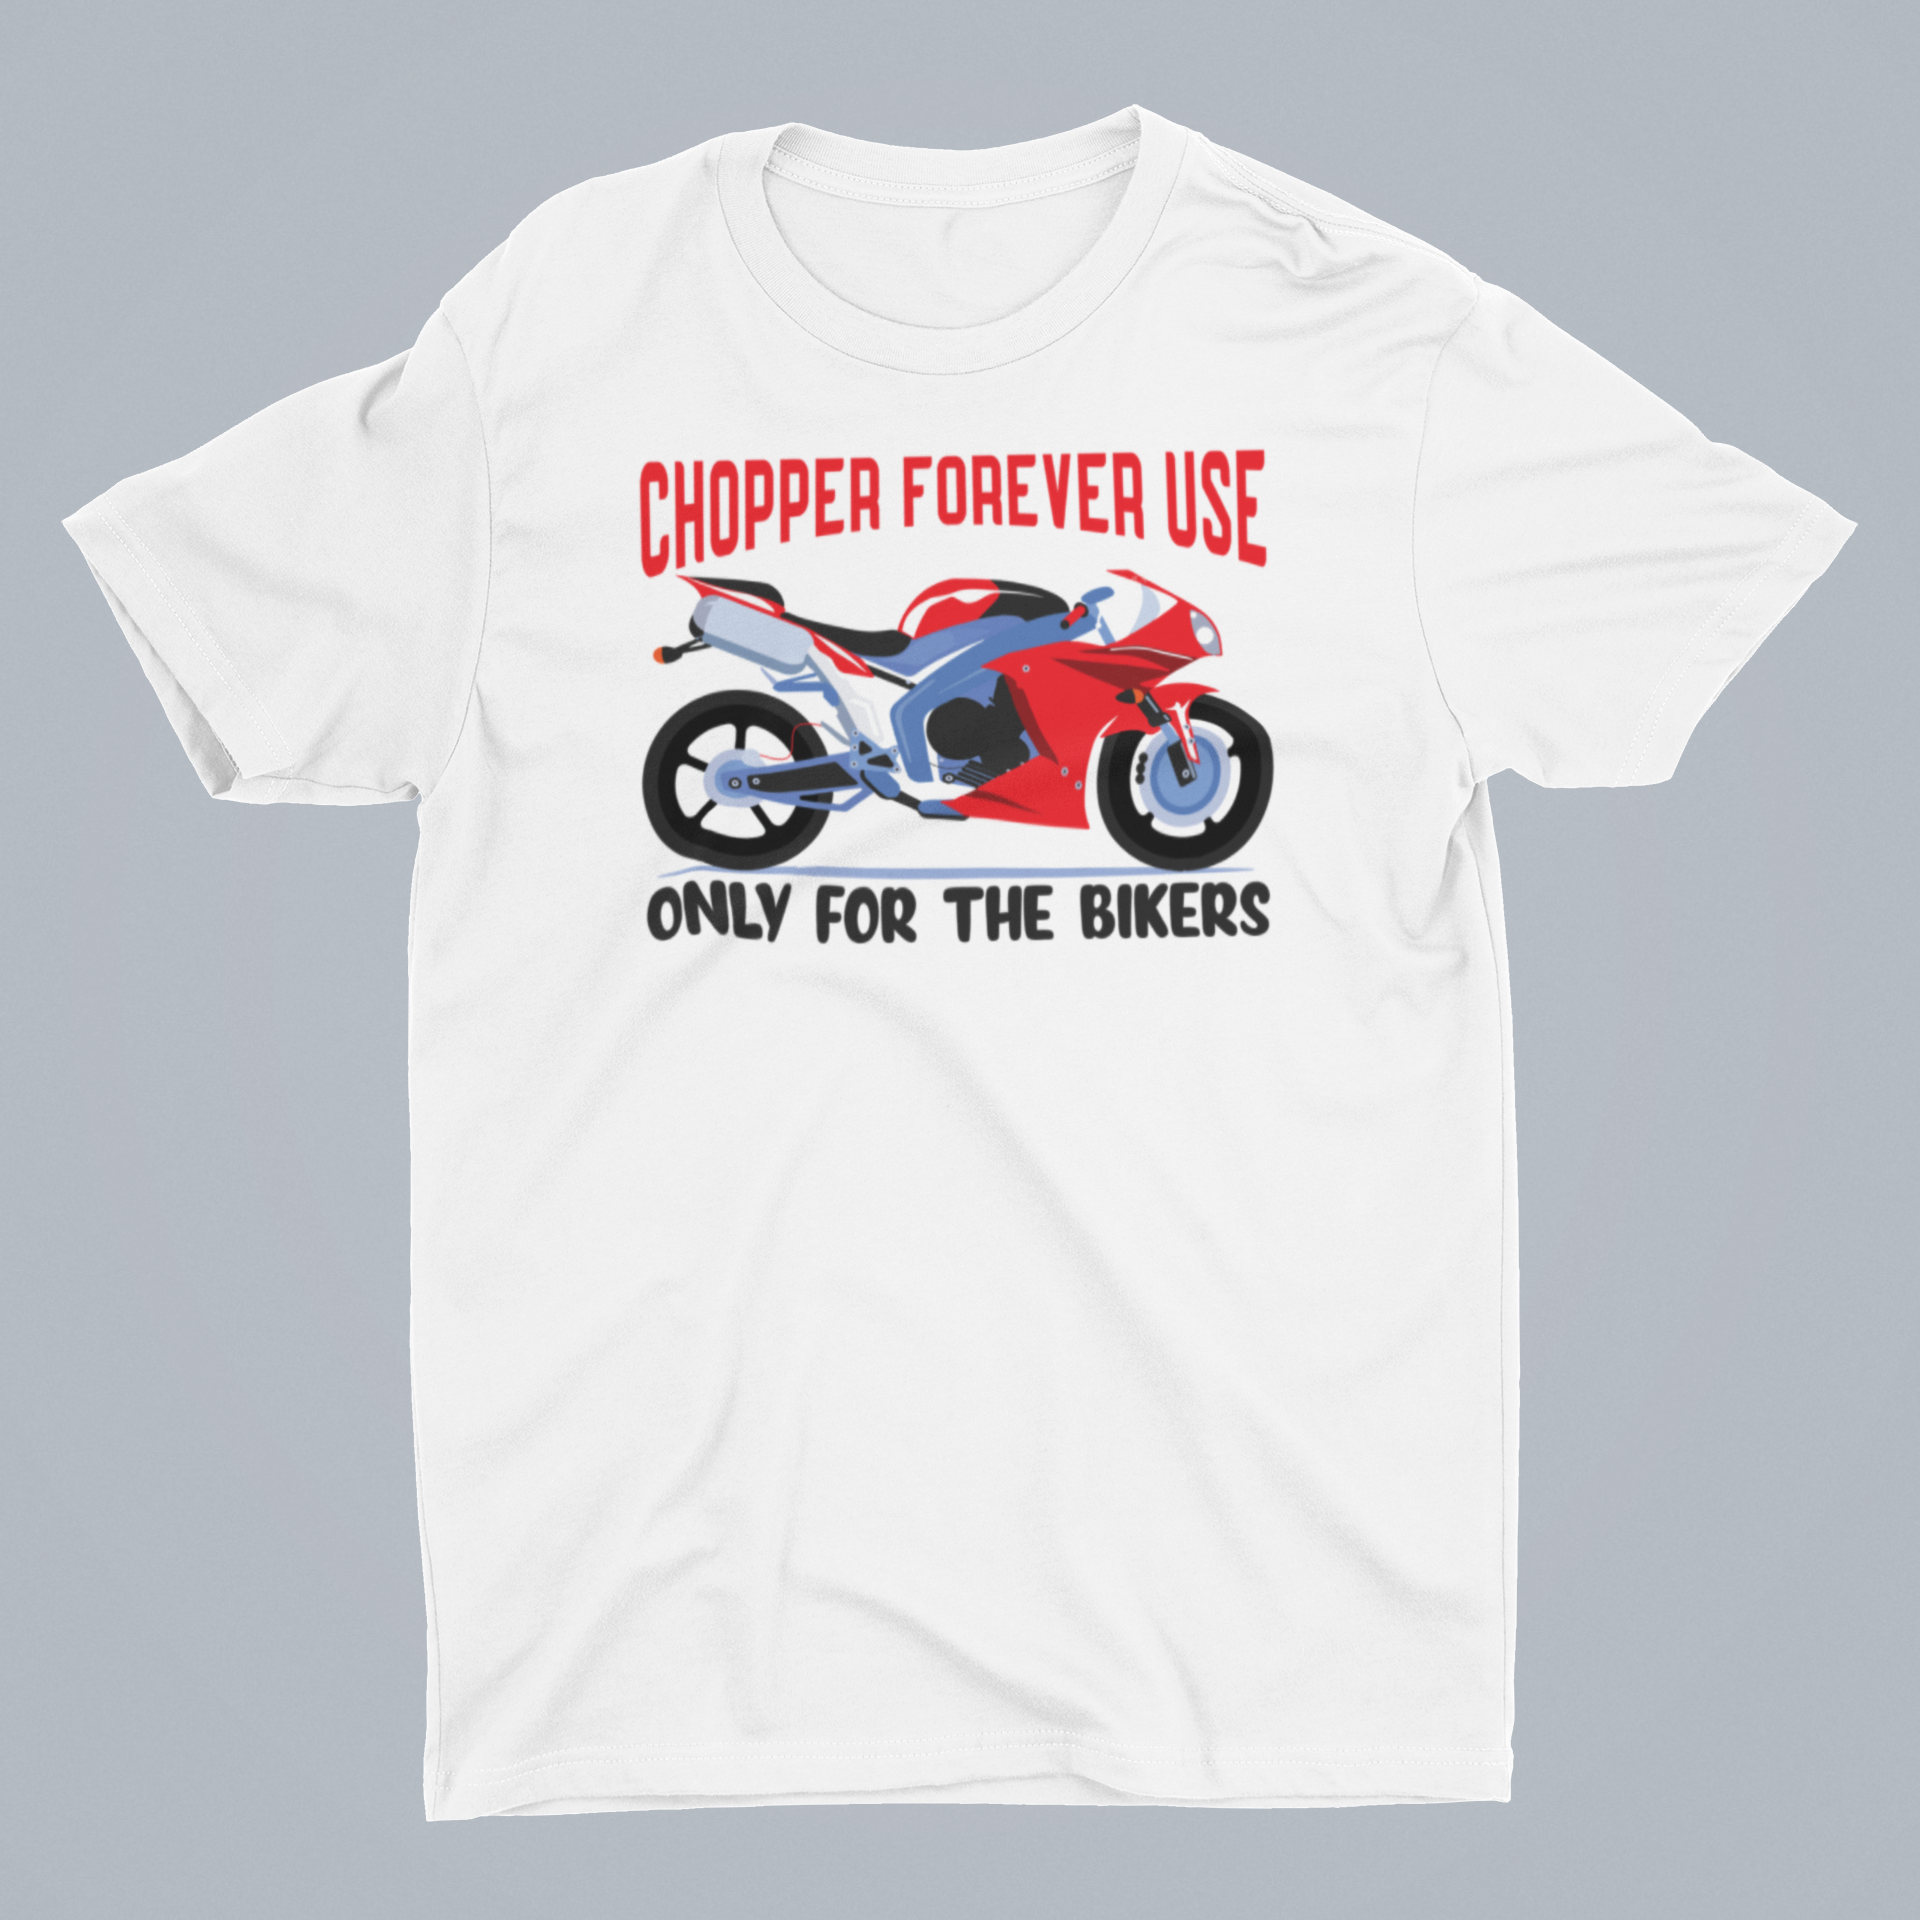 Chopper Only For Bikers White Round Neck T-Shirt for Men